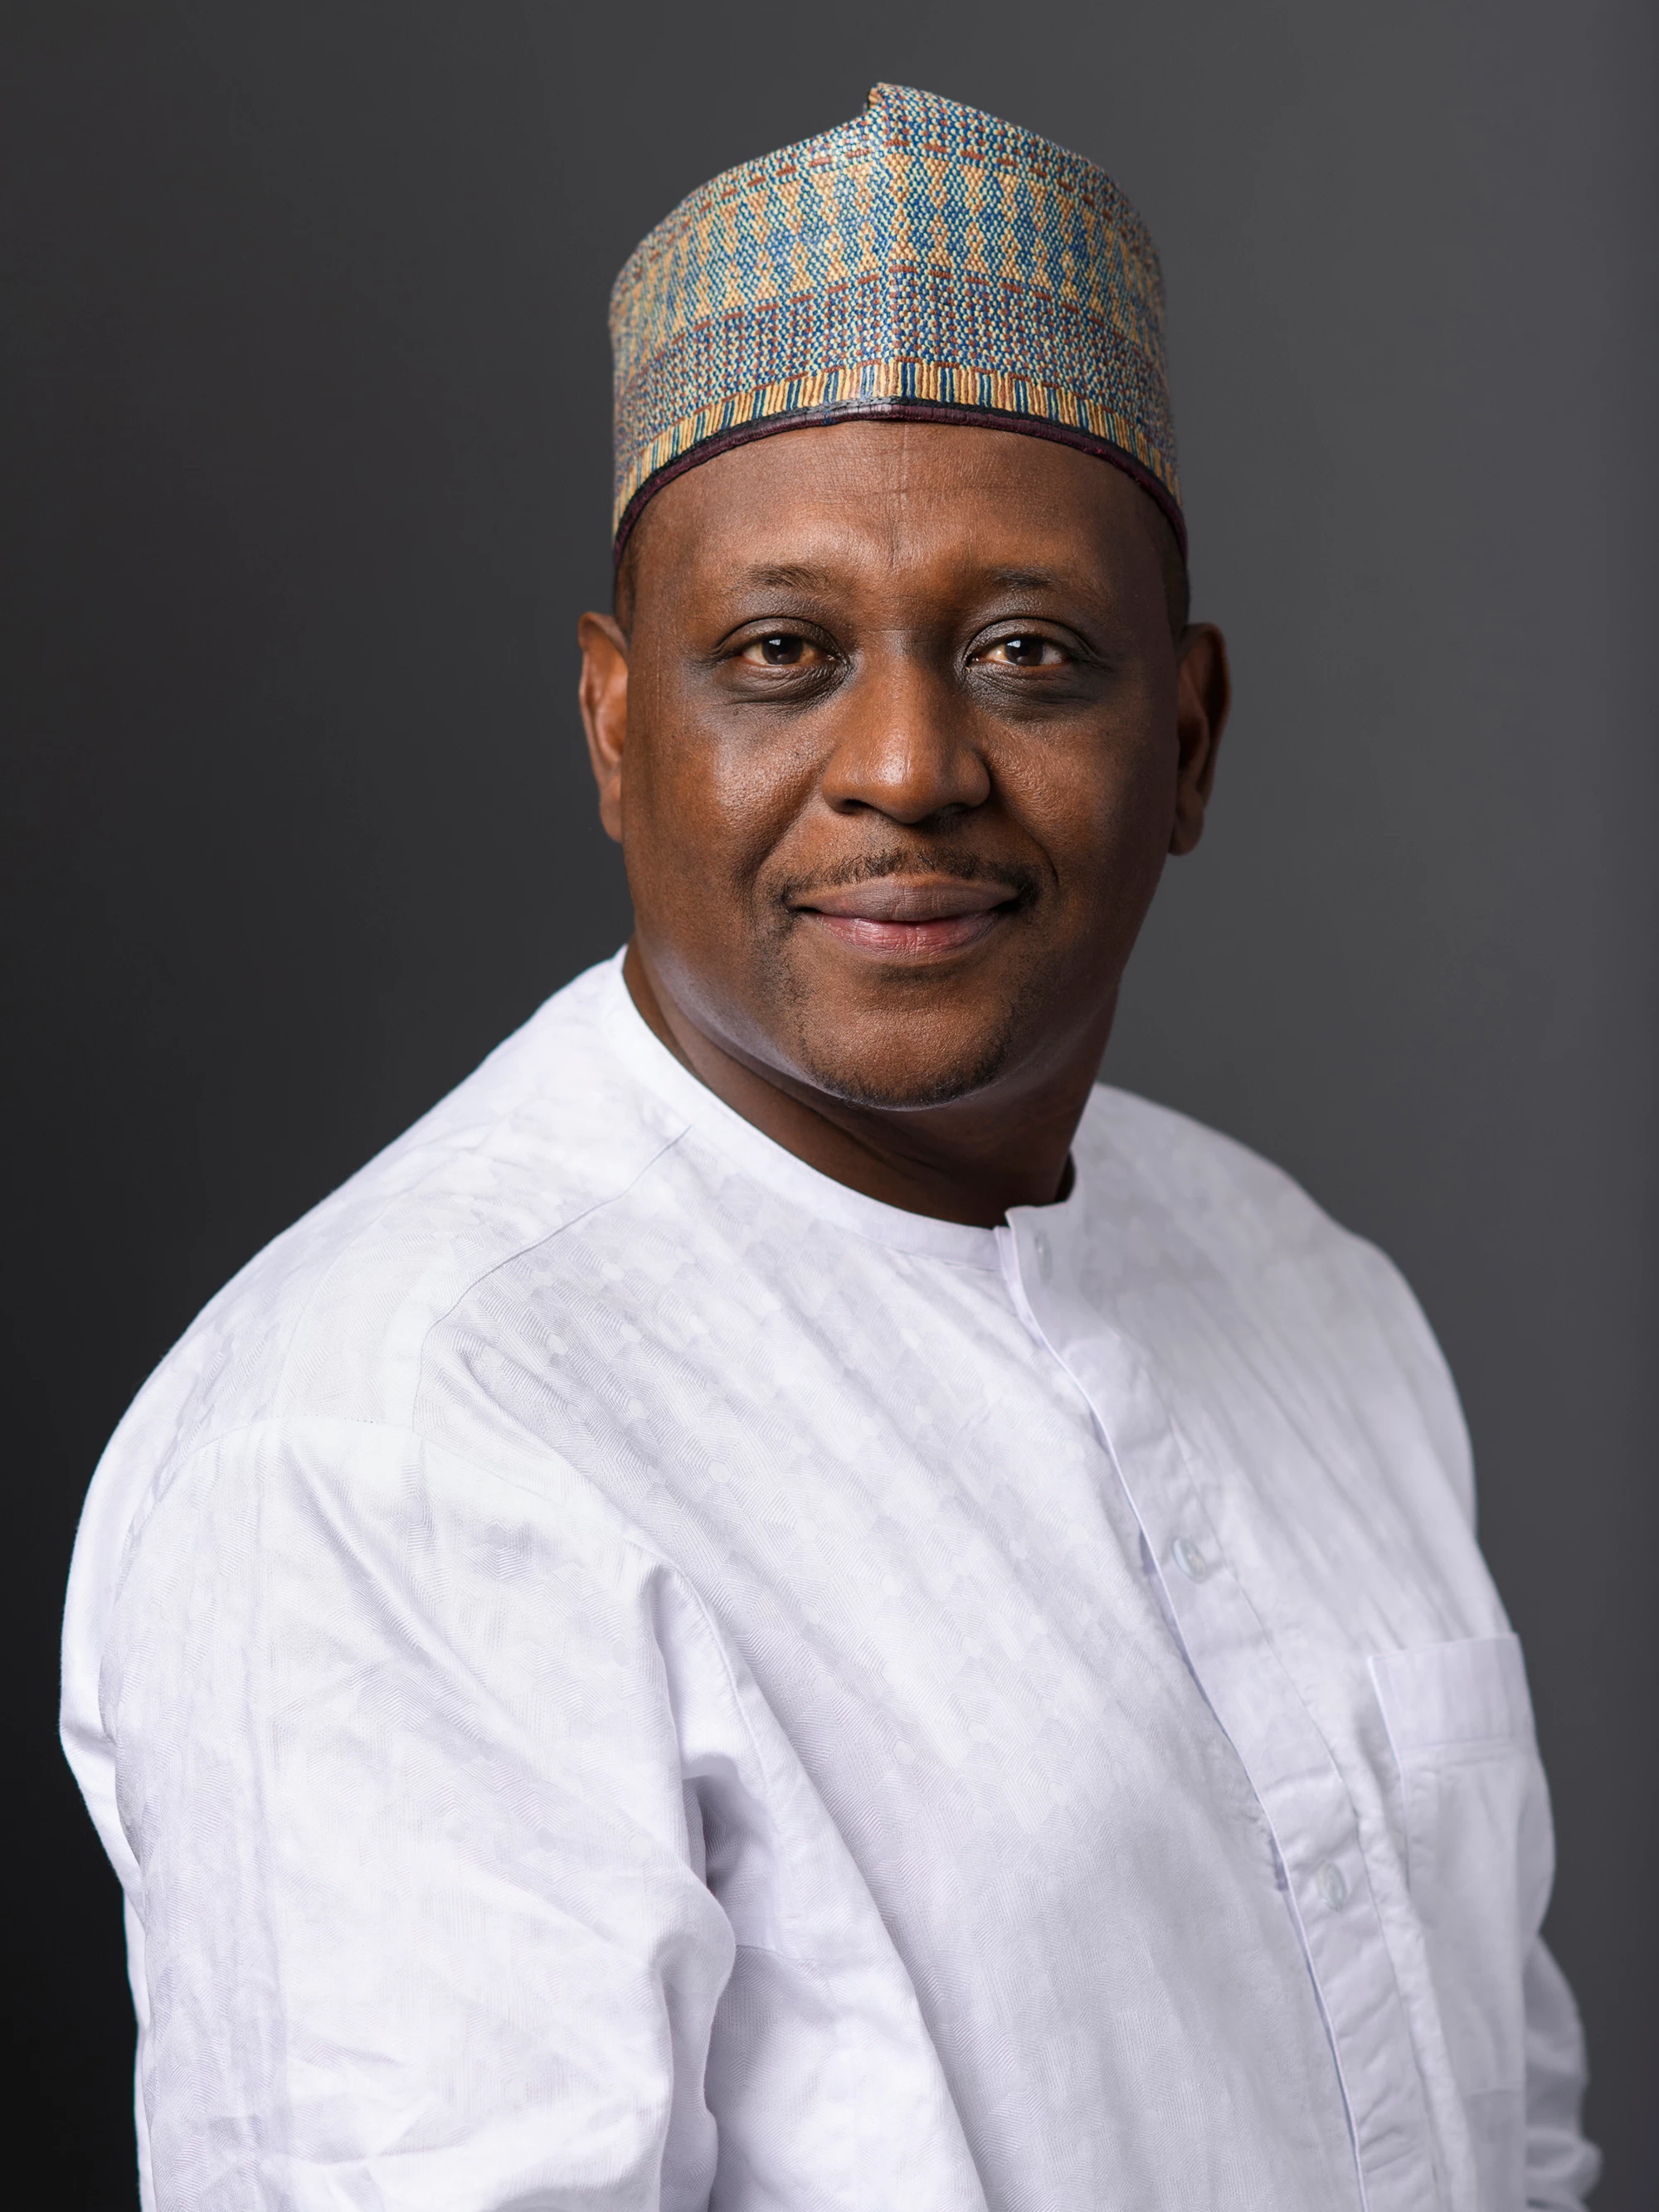 Dr. Muhammad Pate, Minister of Health, Nigeria 